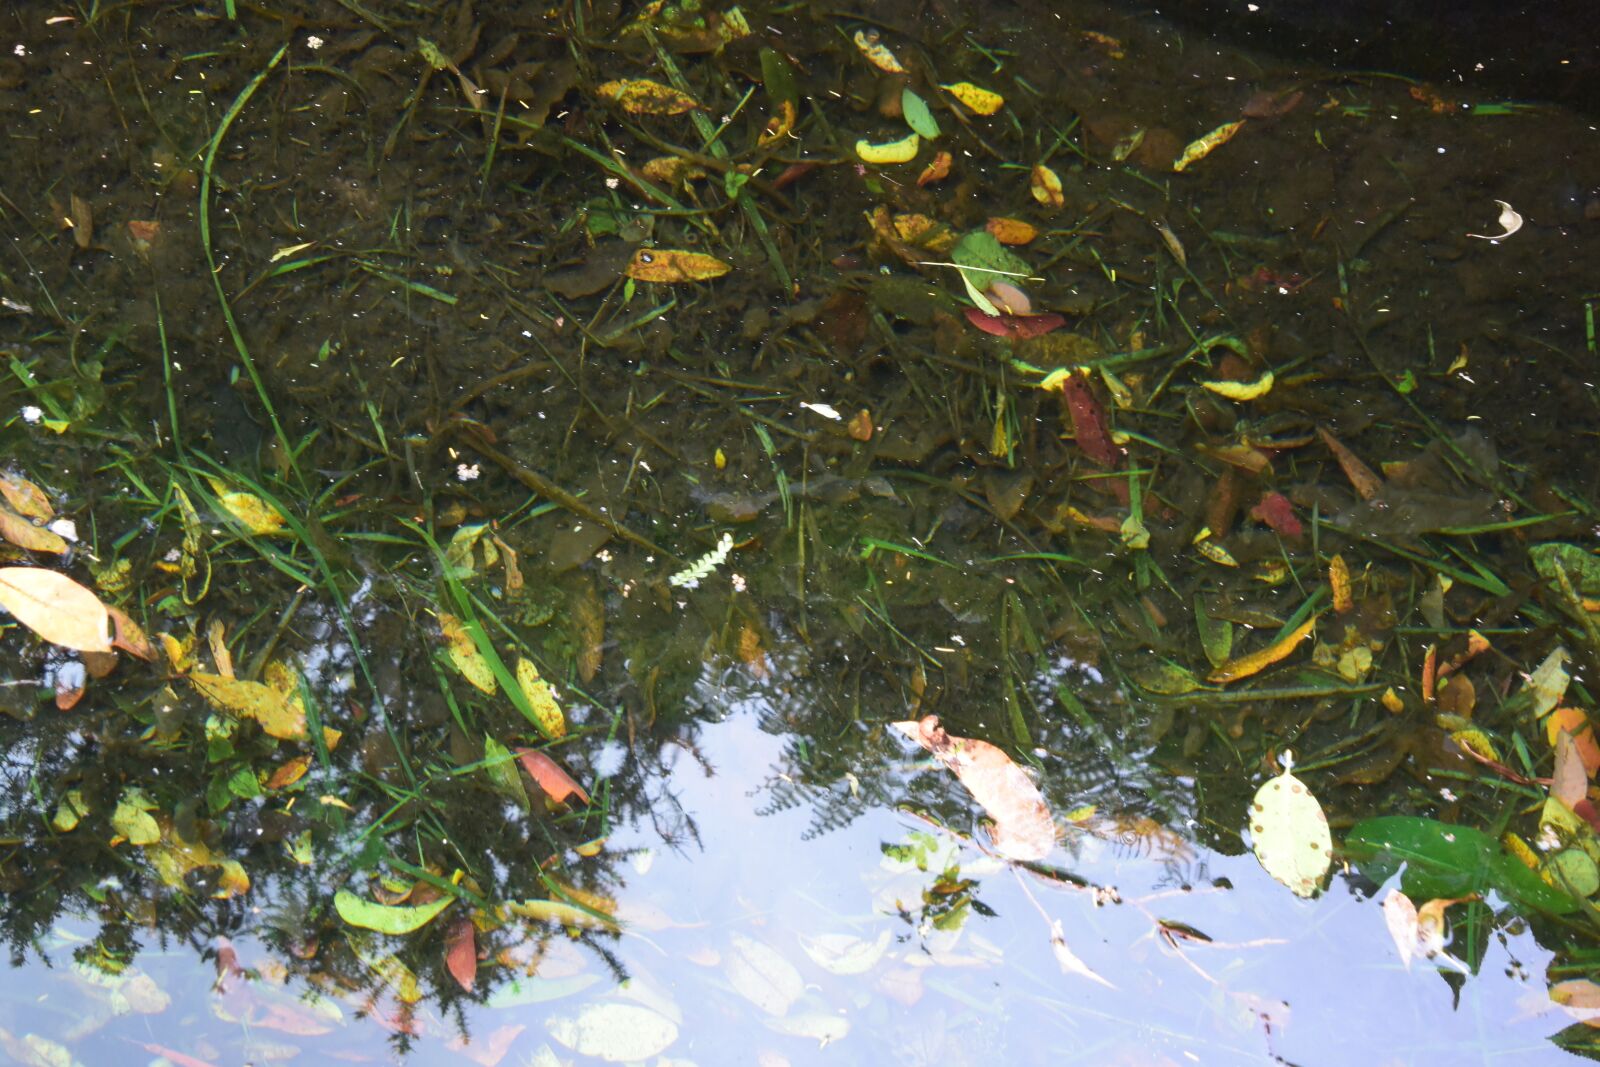 Nikon 1 J4 sample photo. Leaves in water, pond photography